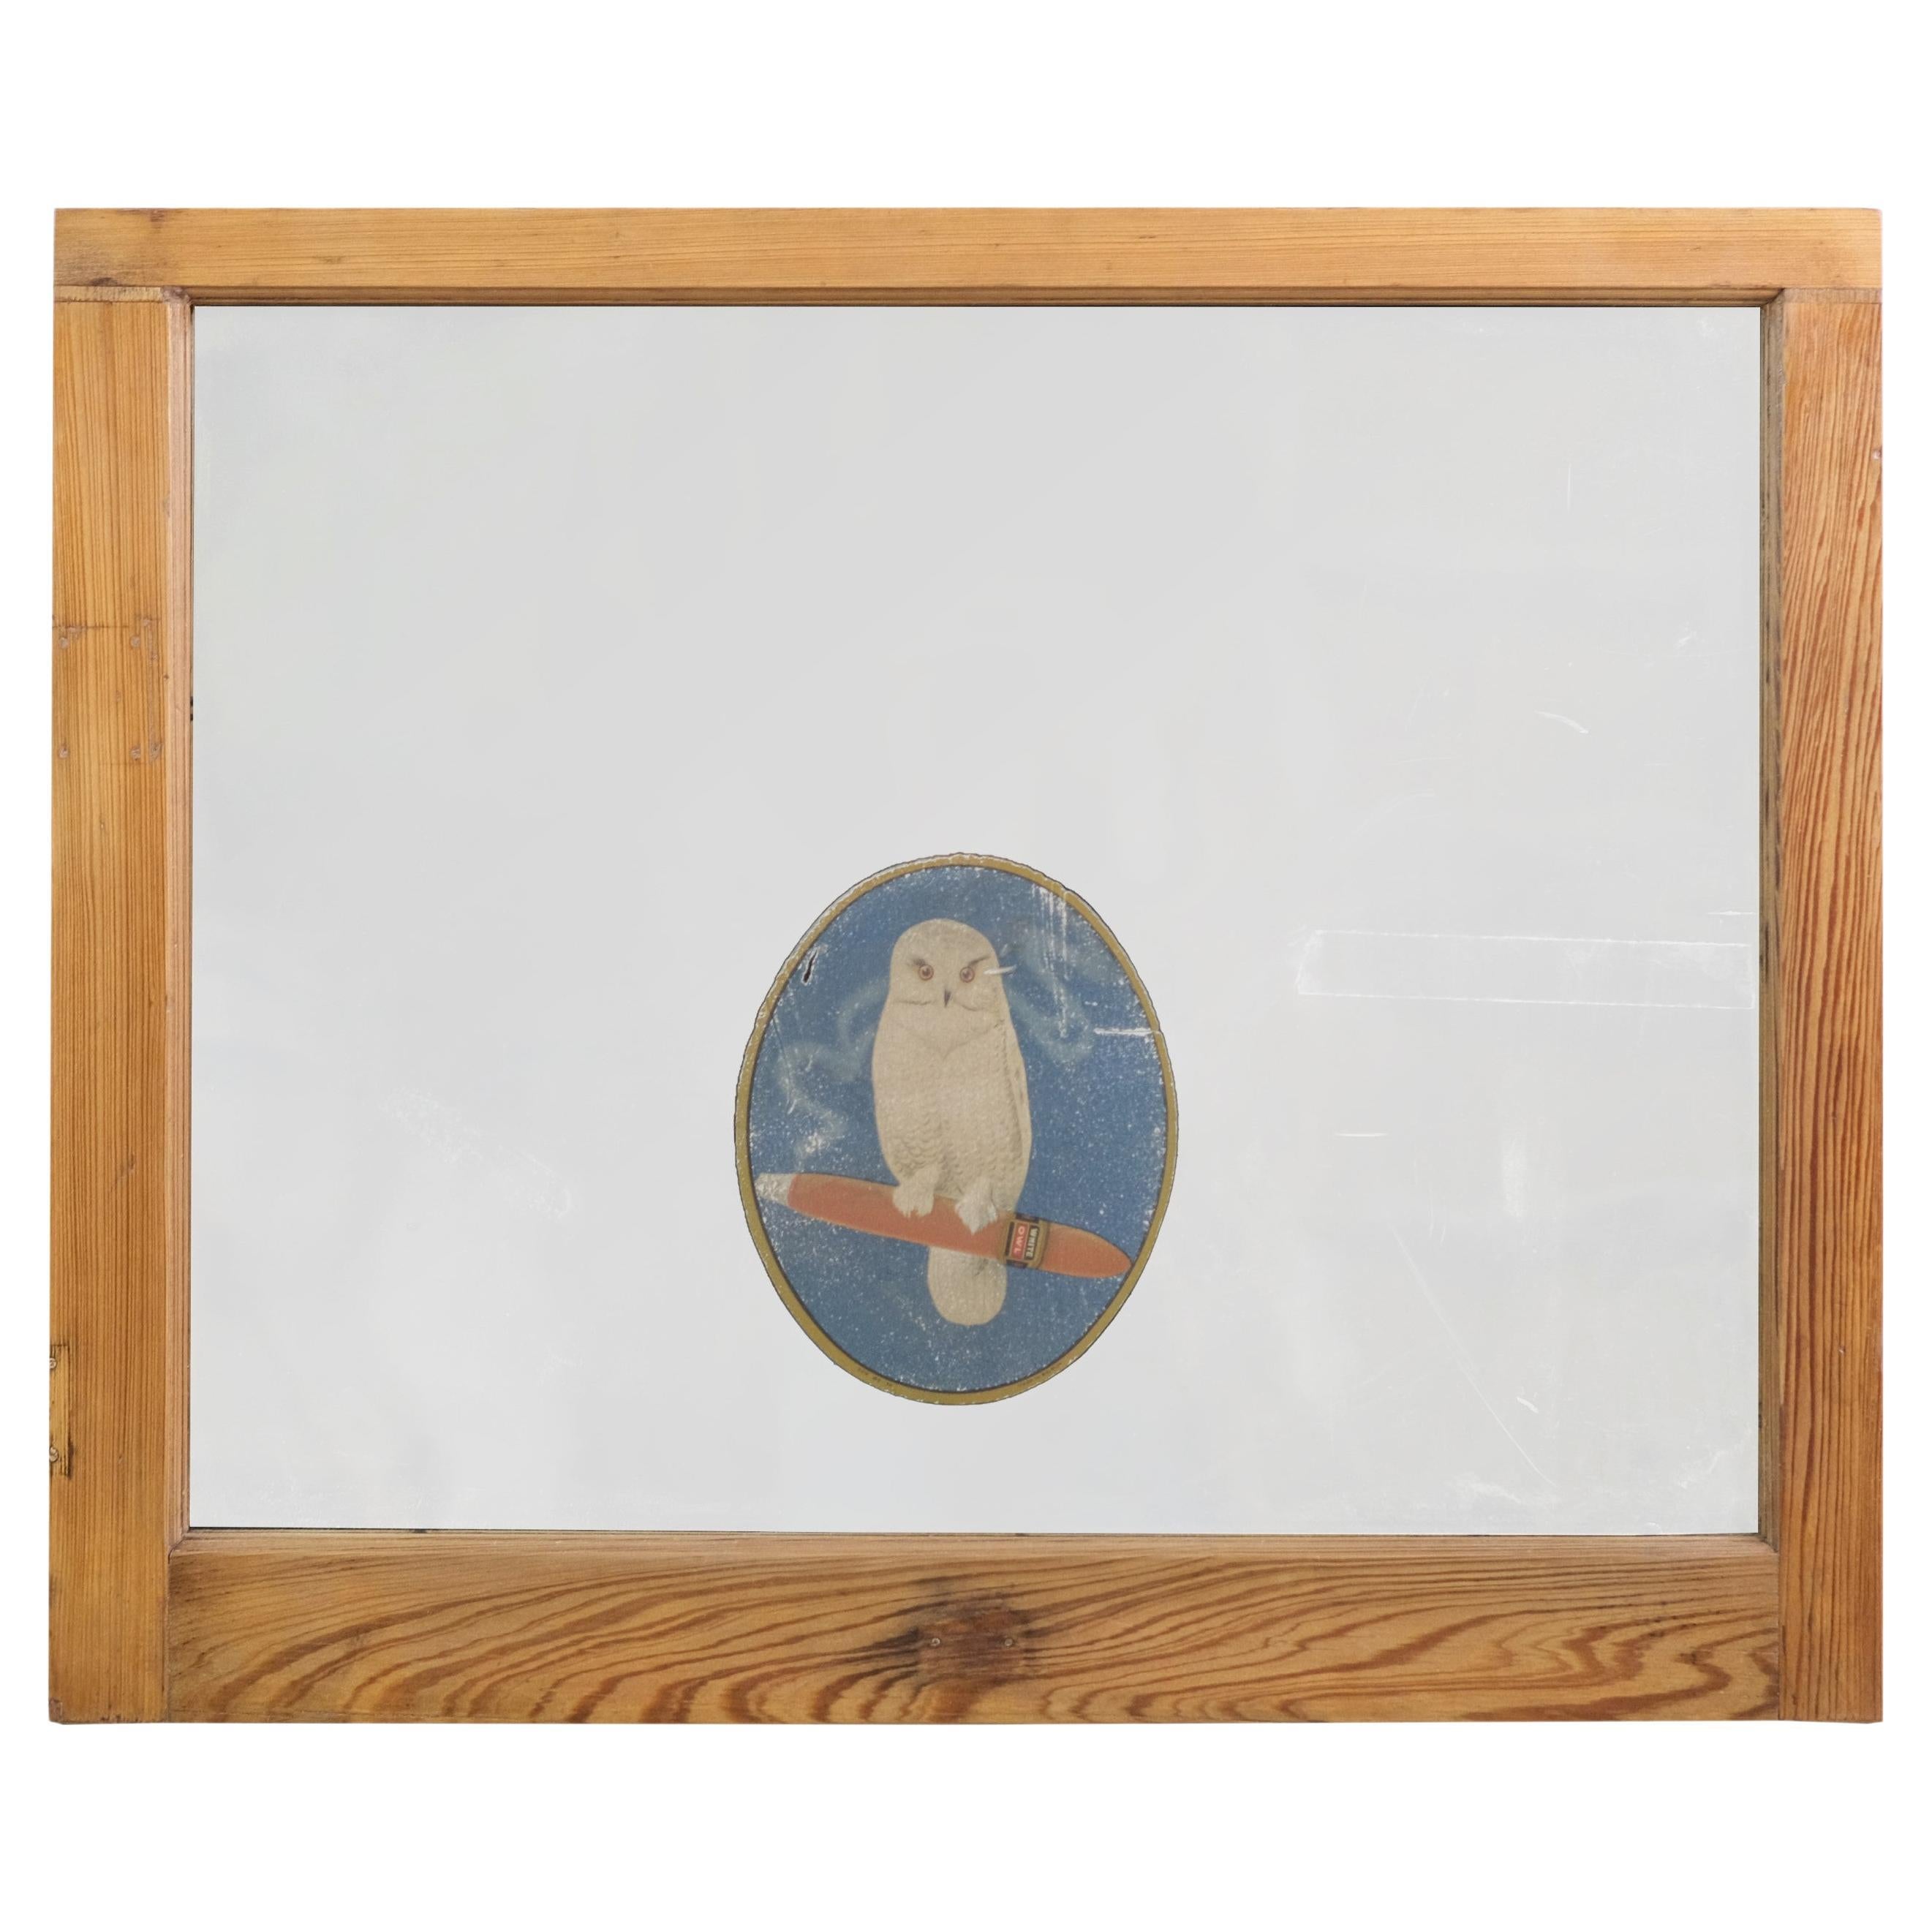 Early Mirrored Wavy Glass Window White Owl Cigar Decal For Sale